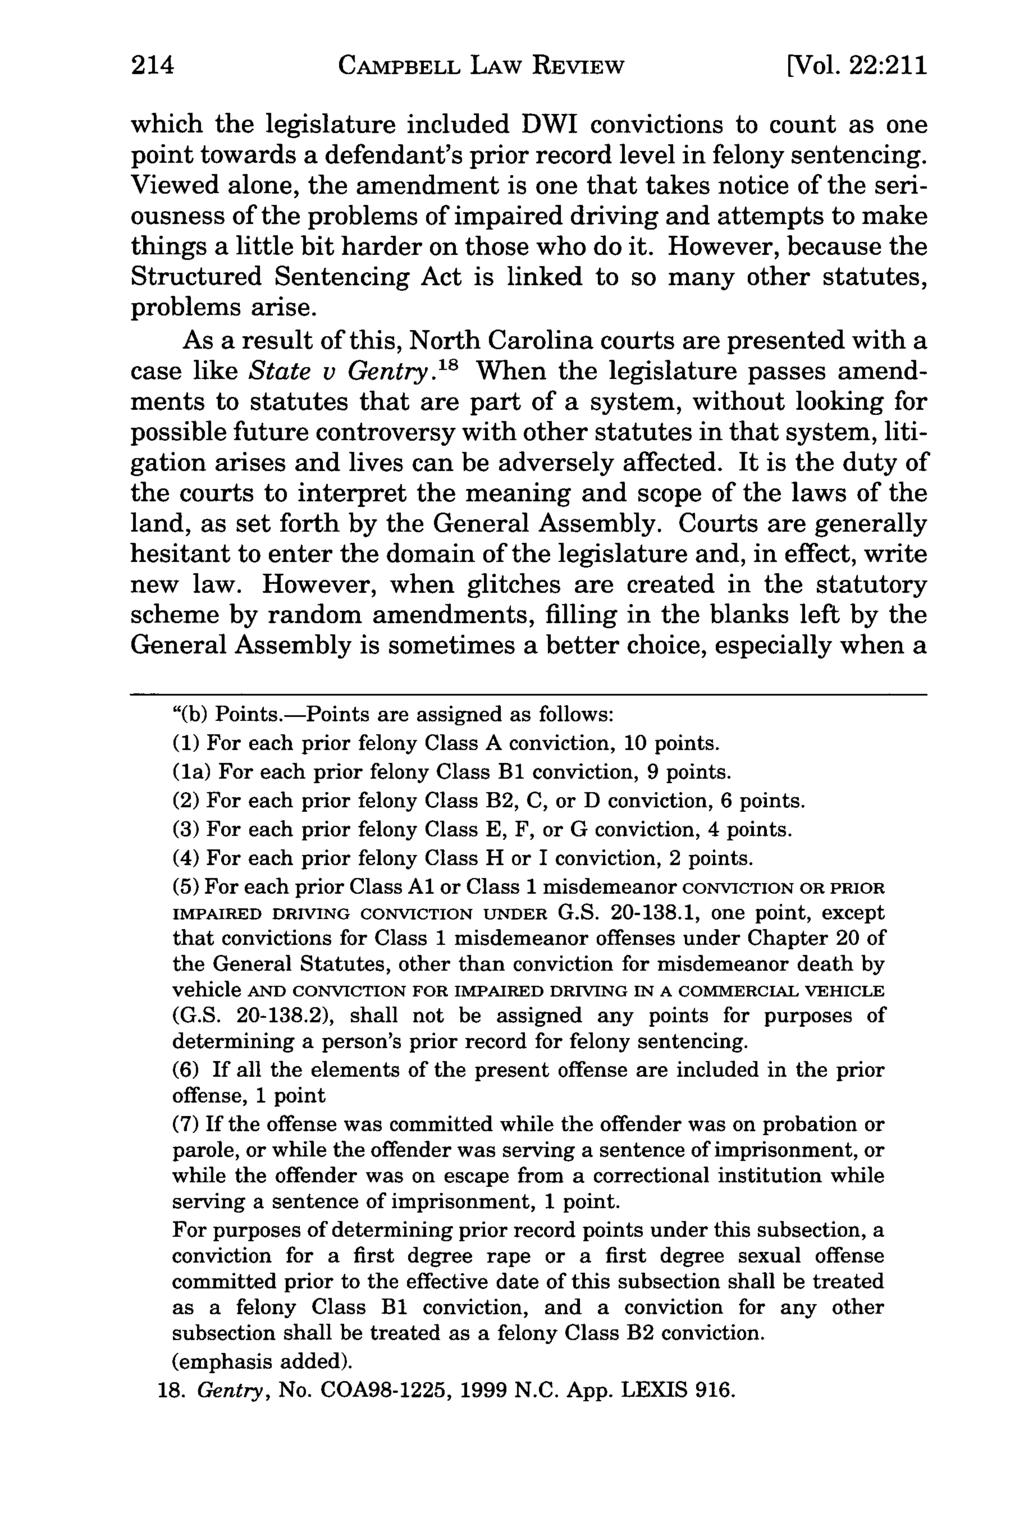 214 Campbell CAMPBELL Law Review, LAW Vol. 22, REVIEW Iss. 1 [1999], Art. 7 [Vol.